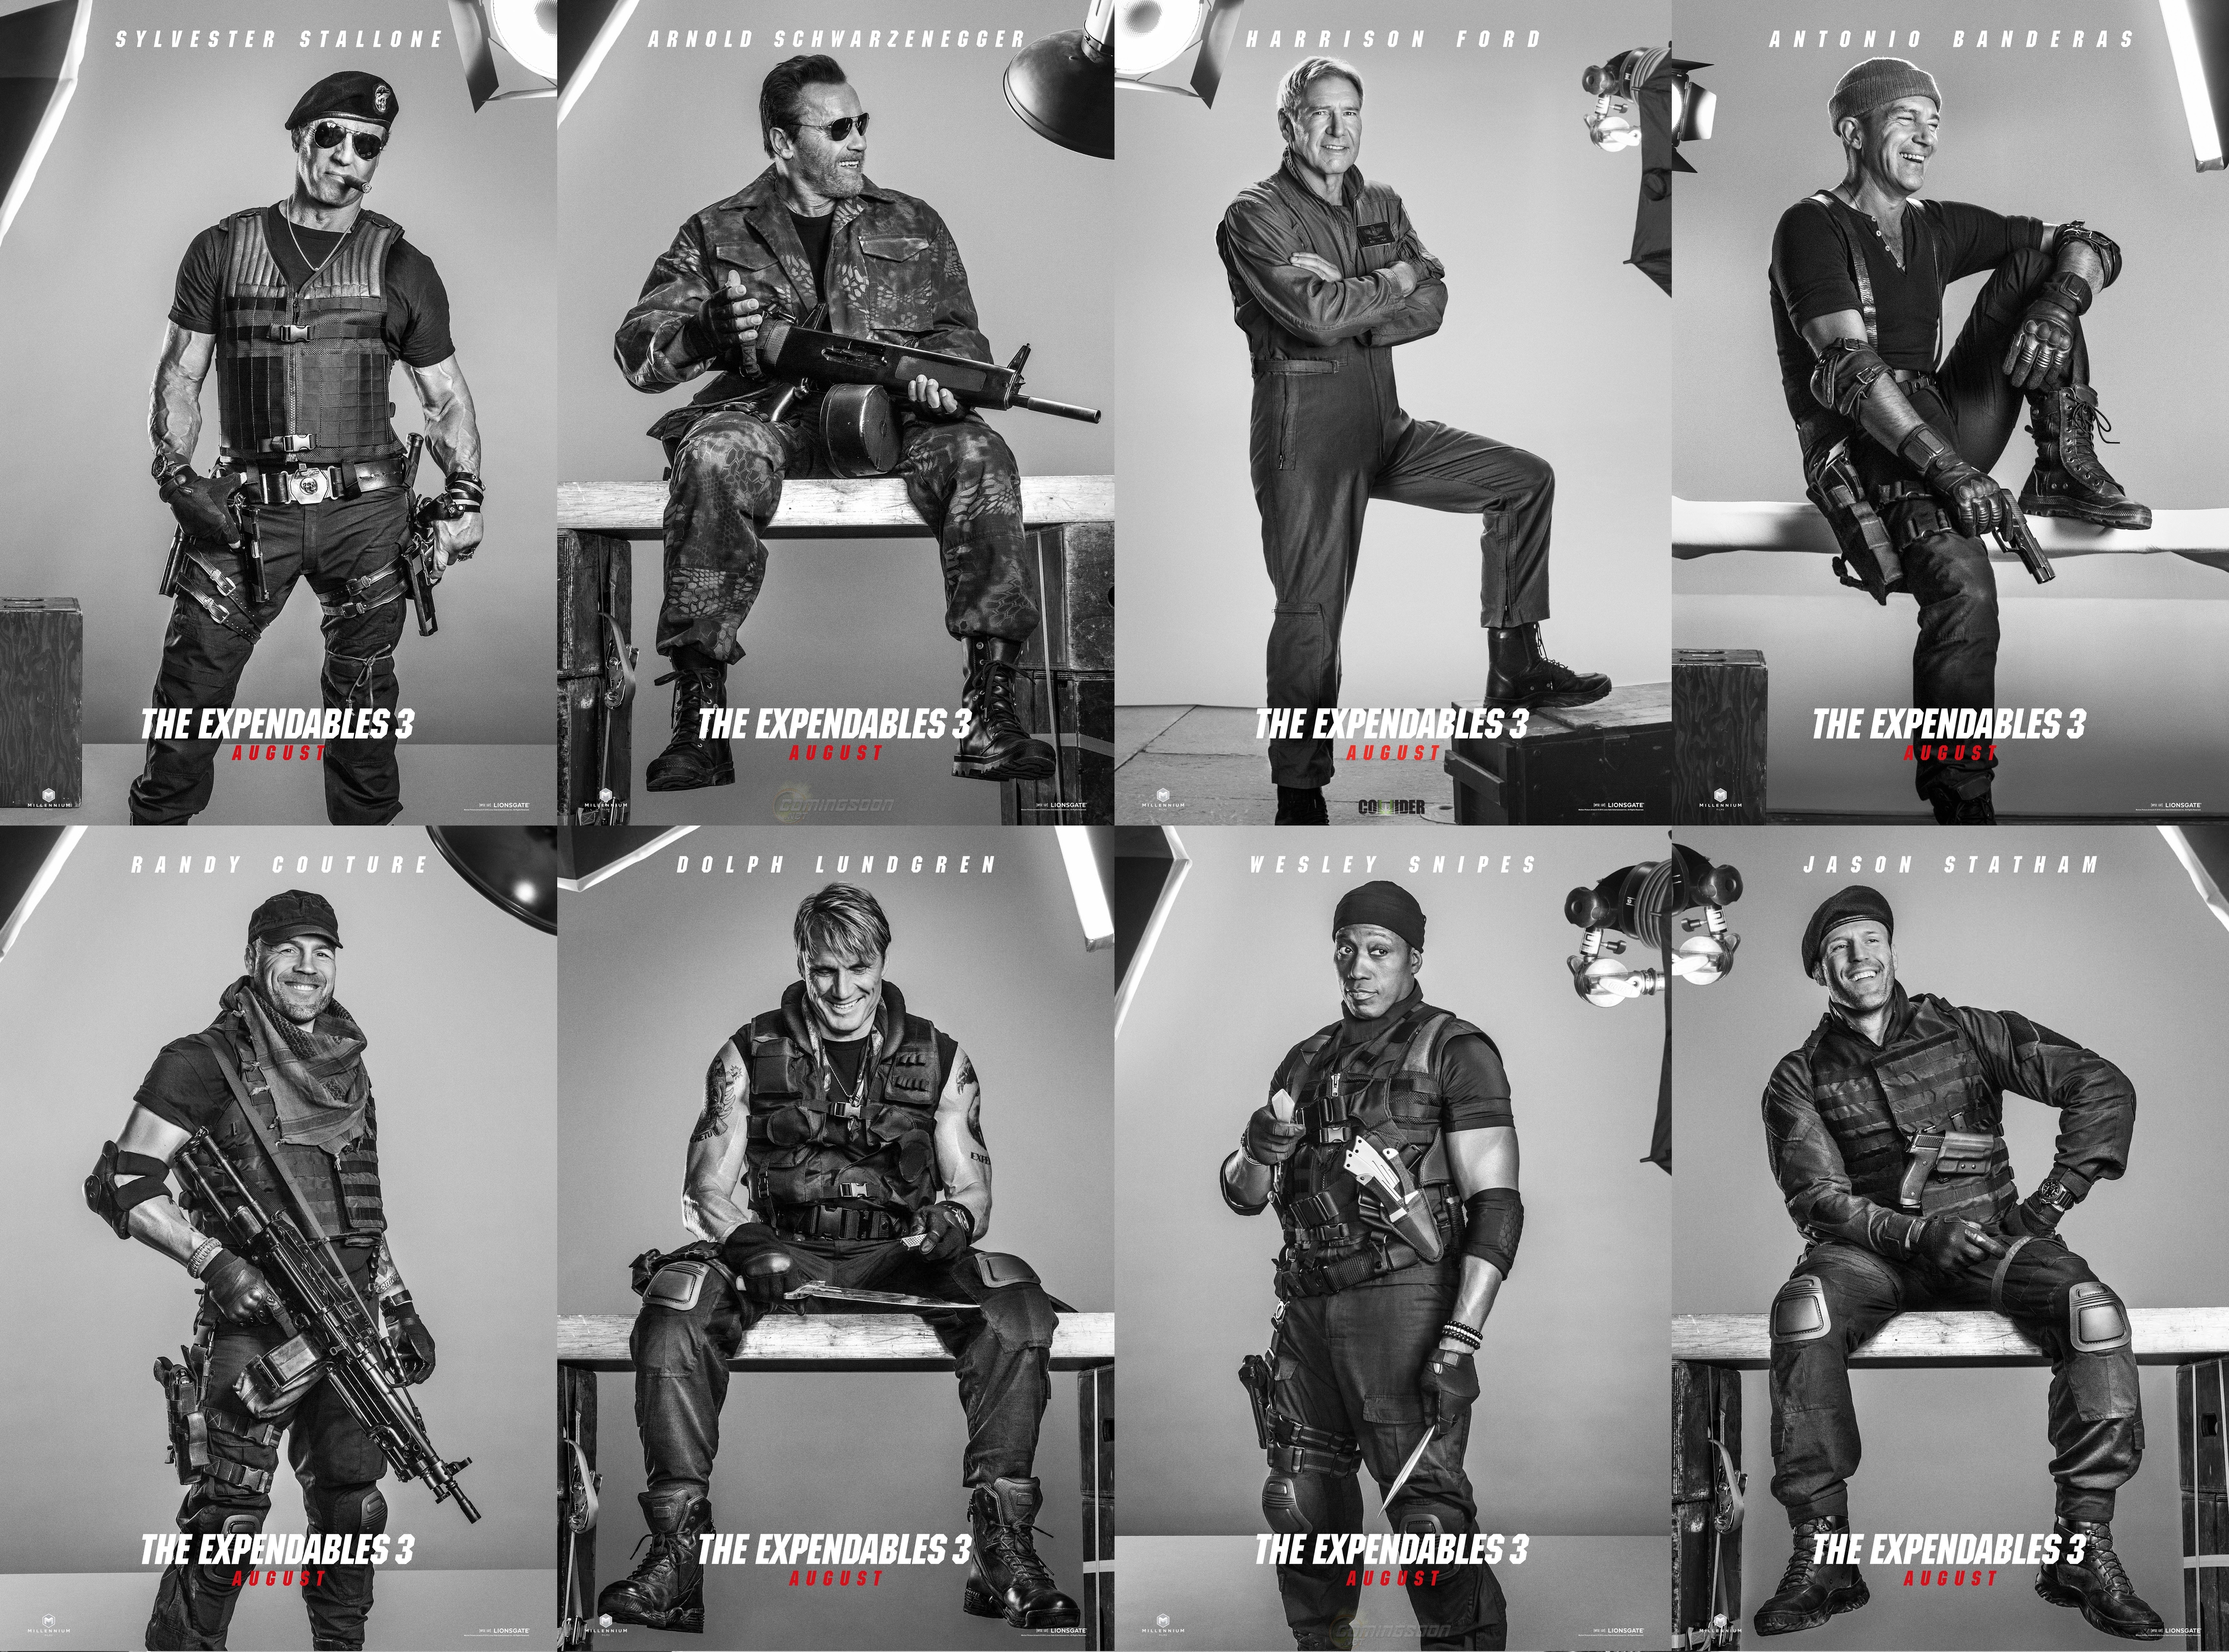 movie, the expendables 3, antonio banderas, arnold schwarzenegger, barney ross, doc (the expendables), dolph lundgren, galgo (the expendables), gunnar jensen, harrison ford, jason statham, lee christmas, max drummer, randy couture, sylvester stallone, toll road, trench (the expendables), wesley snipes, the expendables